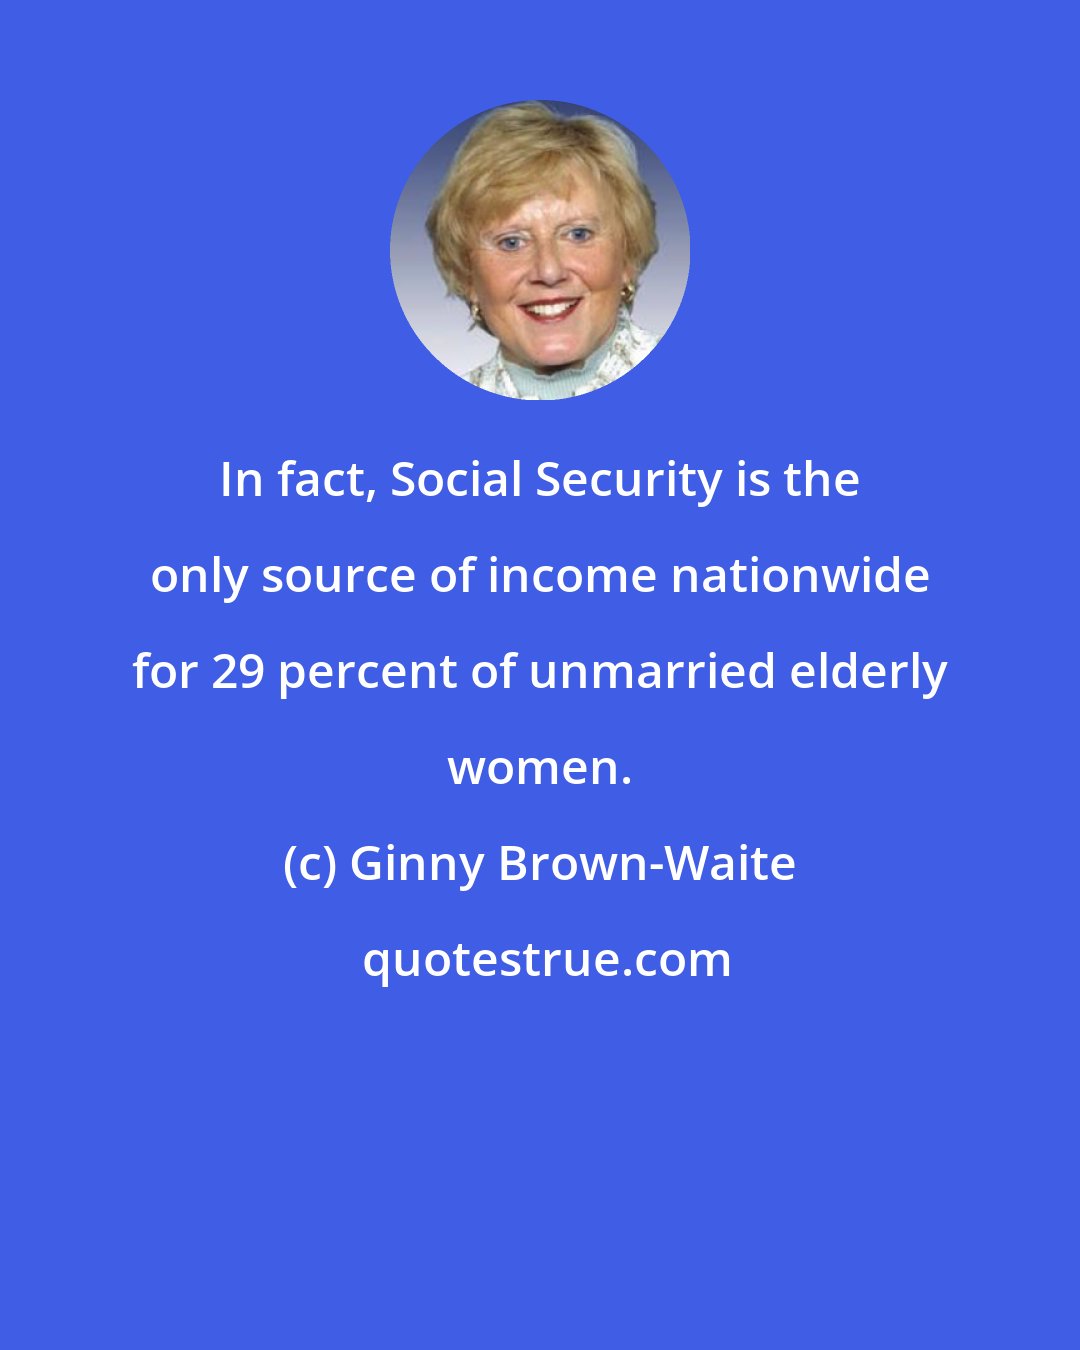 Ginny Brown-Waite: In fact, Social Security is the only source of income nationwide for 29 percent of unmarried elderly women.